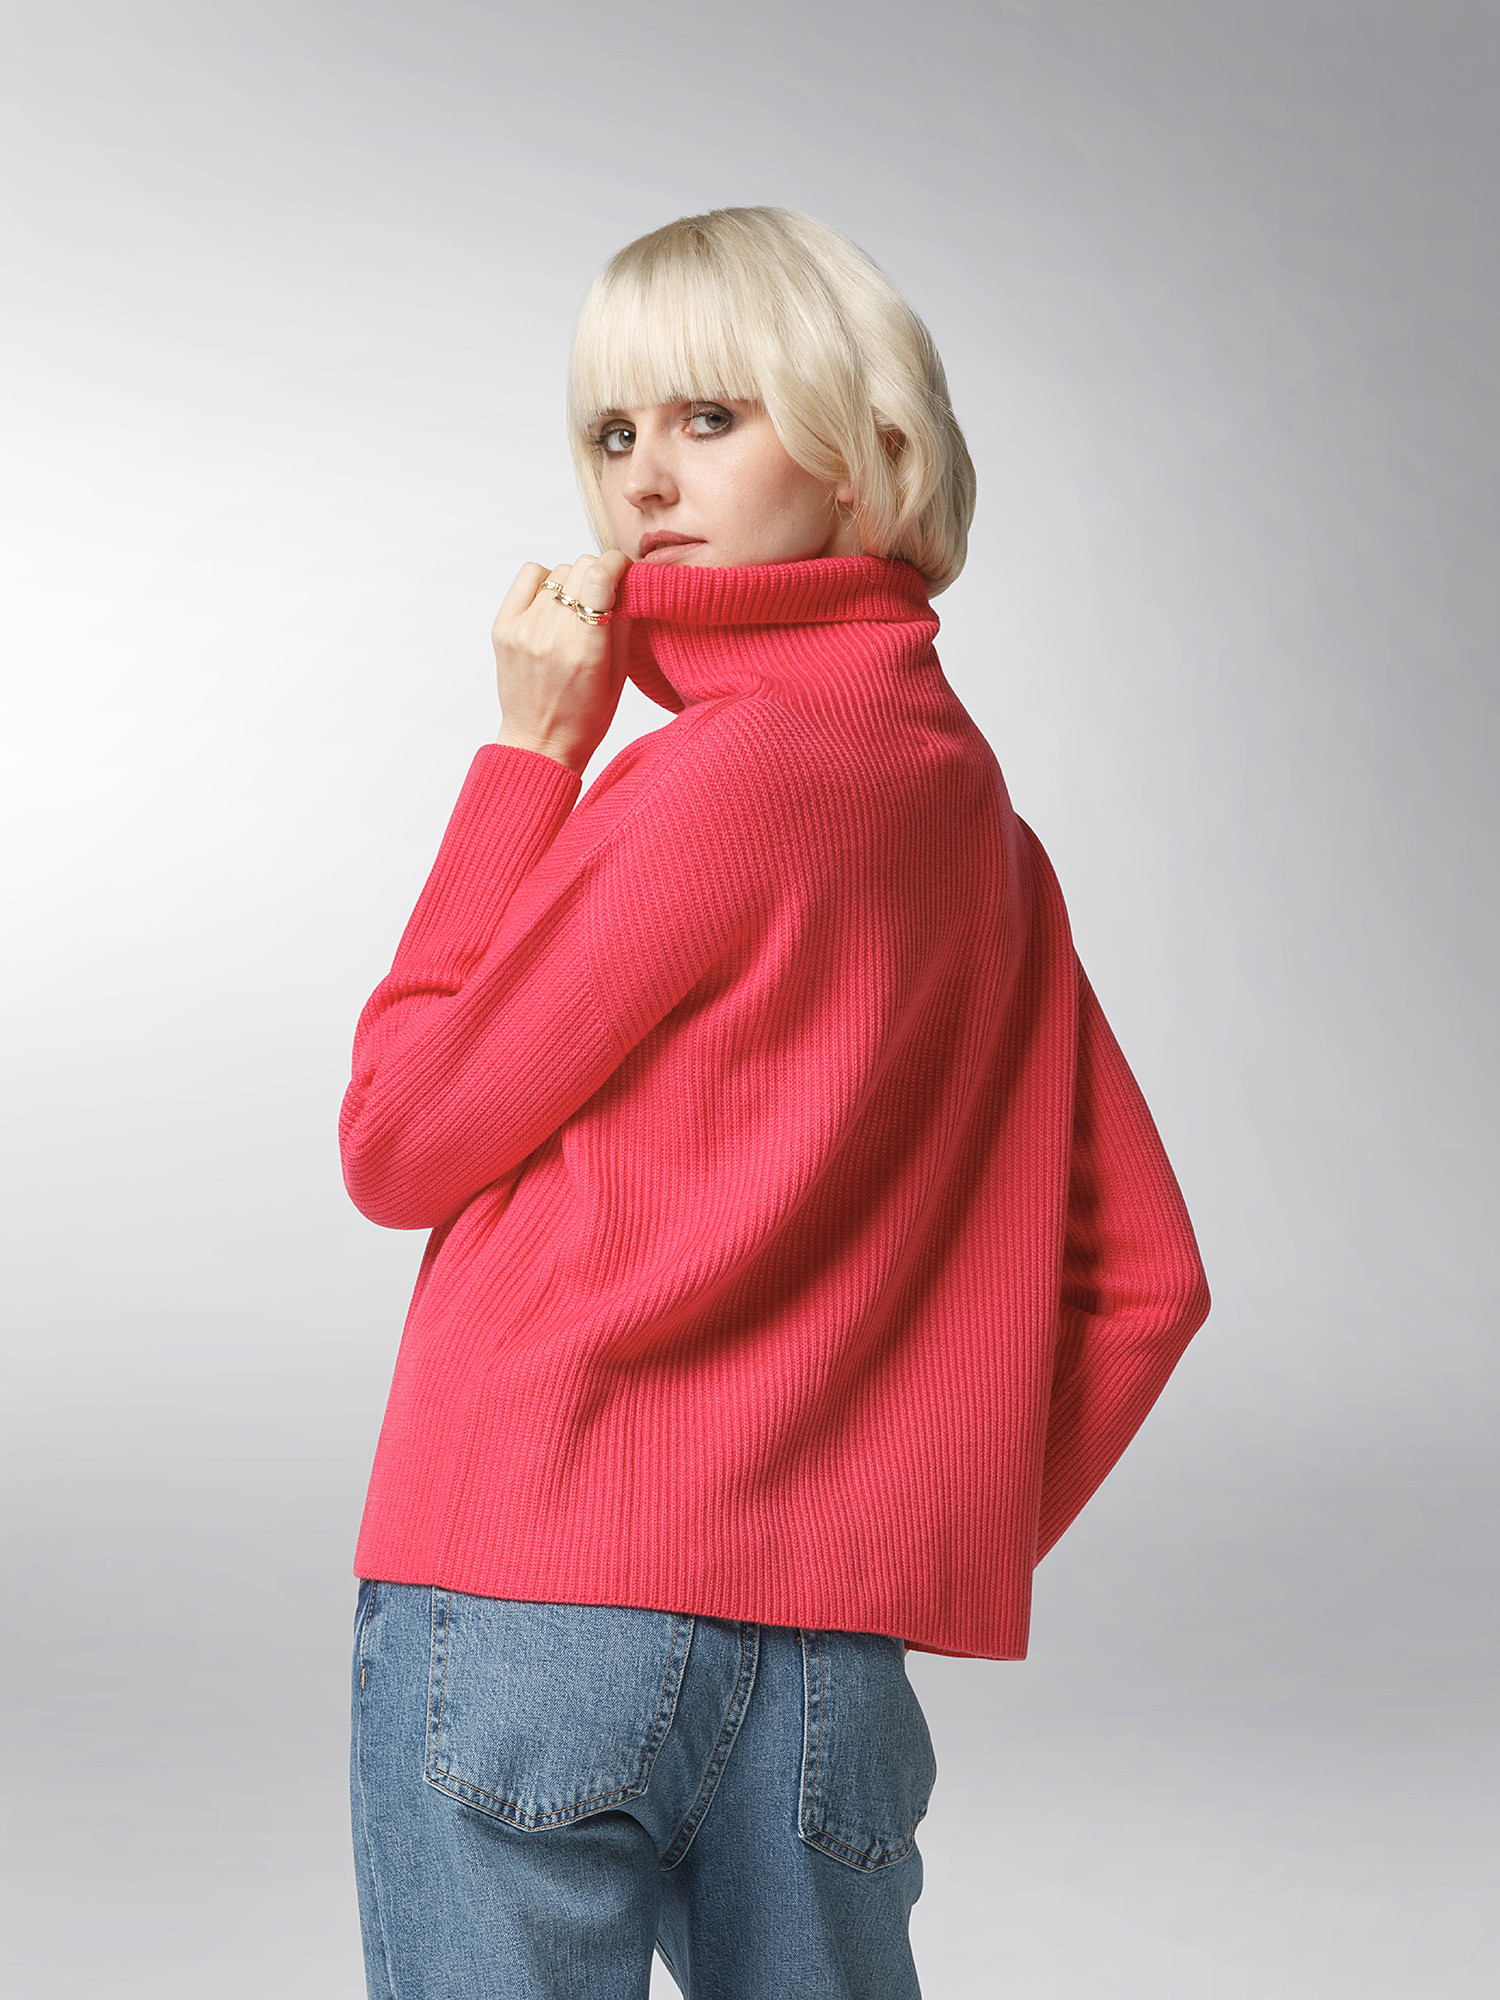 K Collection - Turtleneck pullover in extrafine wool, Pink Fuchsia, large image number 5